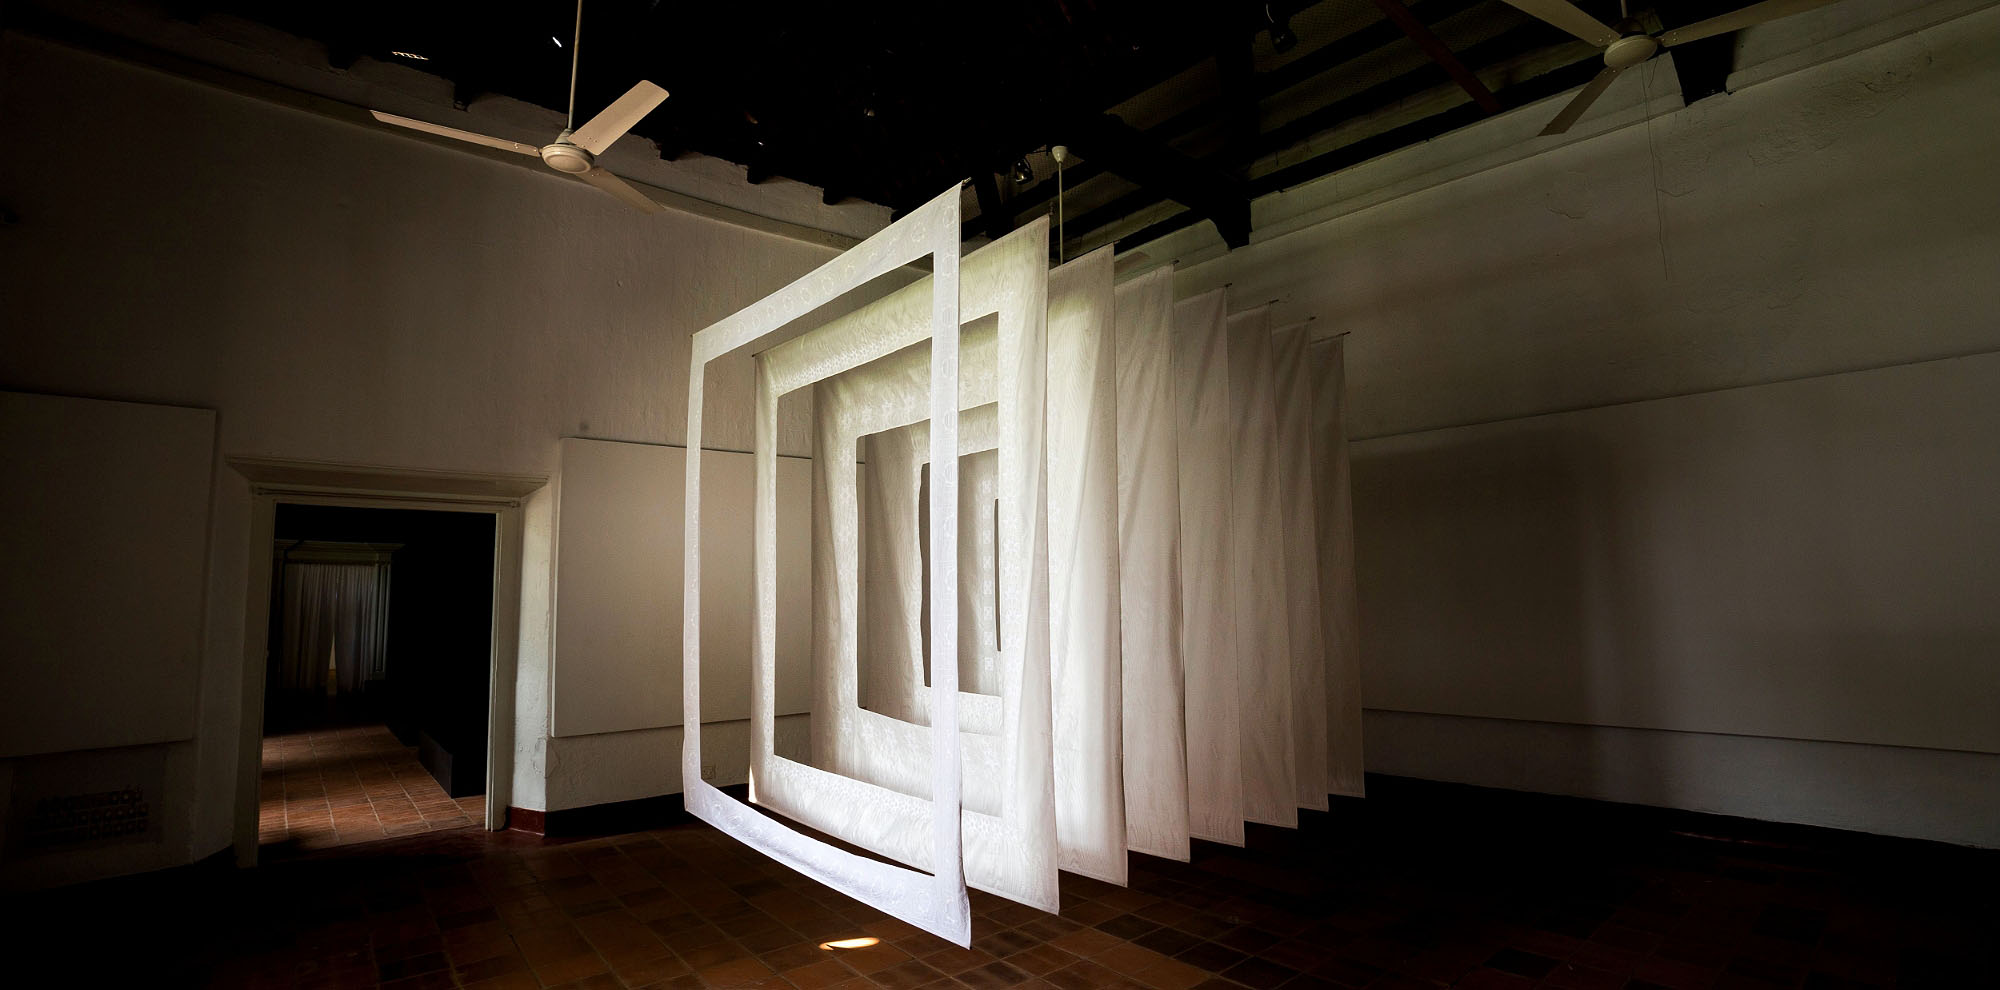 Multiple cut-out cloth screens are installed in descending order of thickness one after another in a large room.